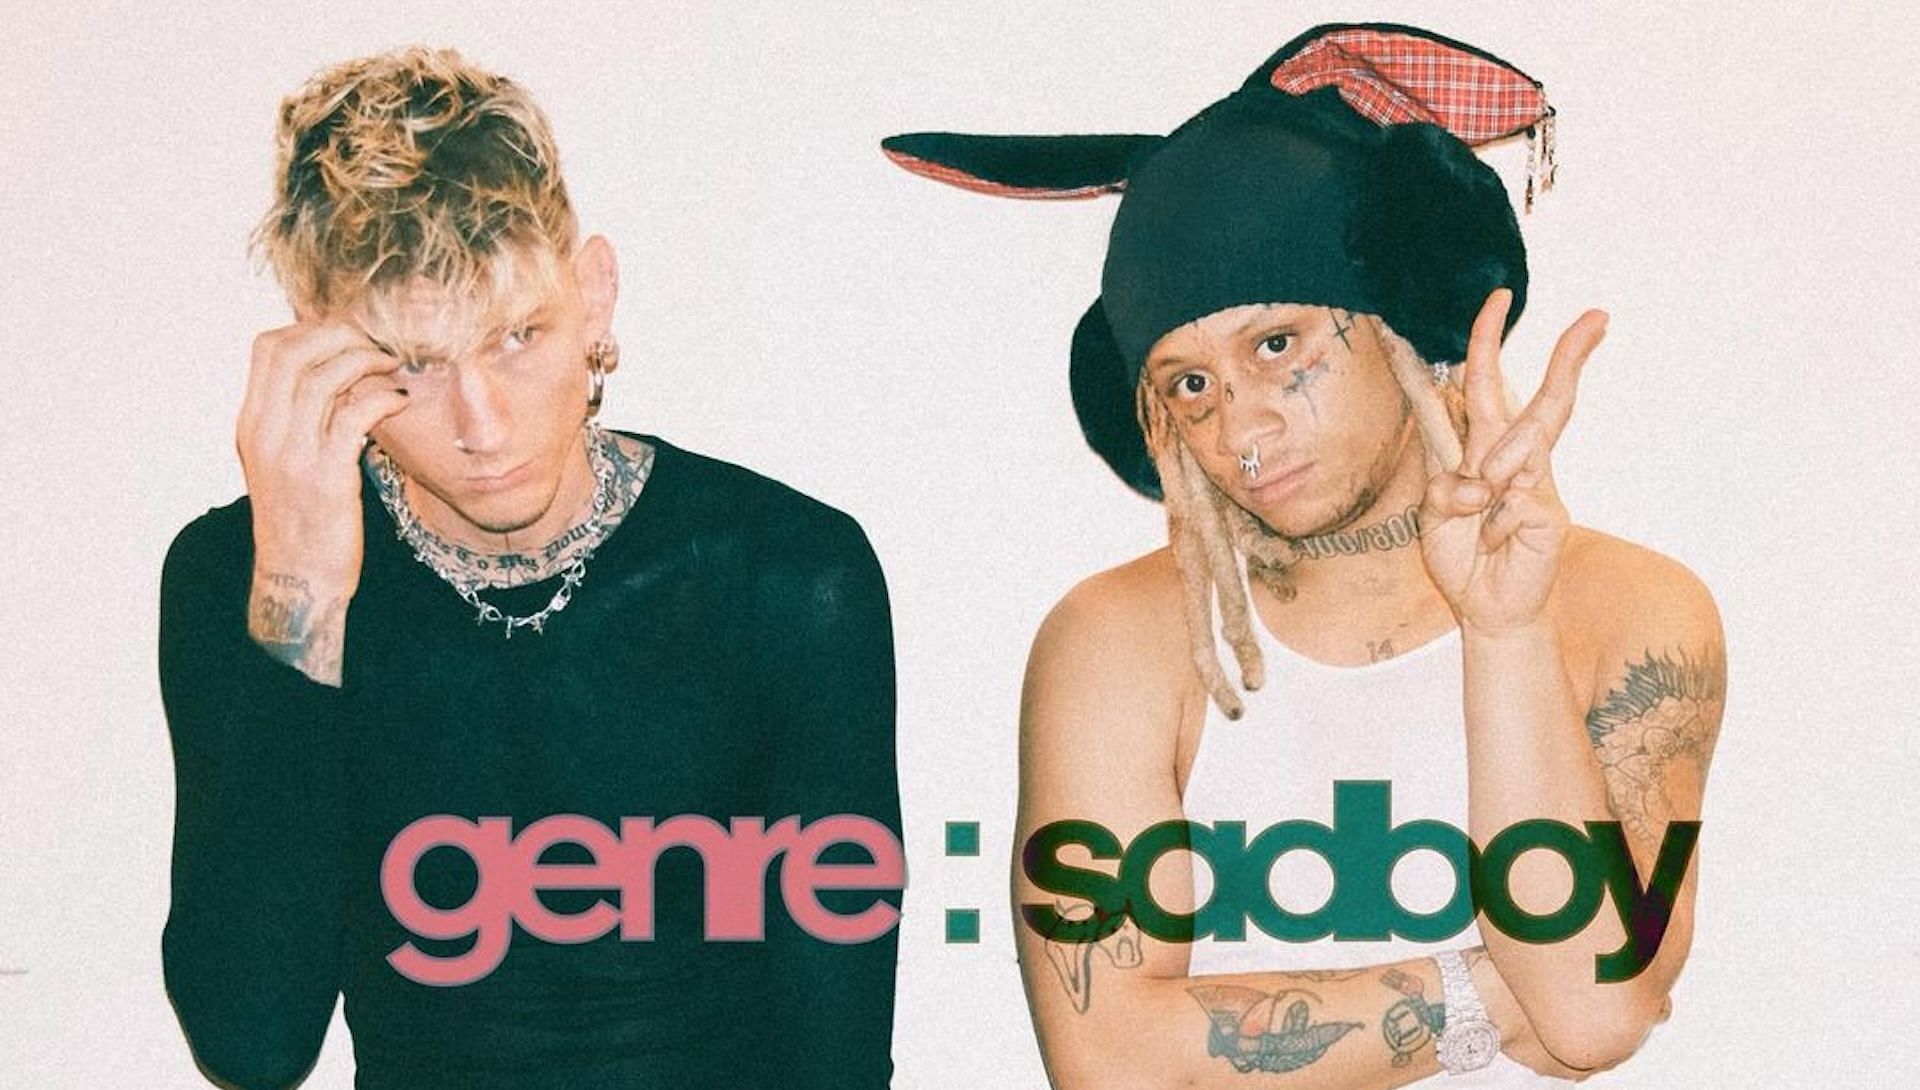 The official album cover for MGK and Trippie Redd